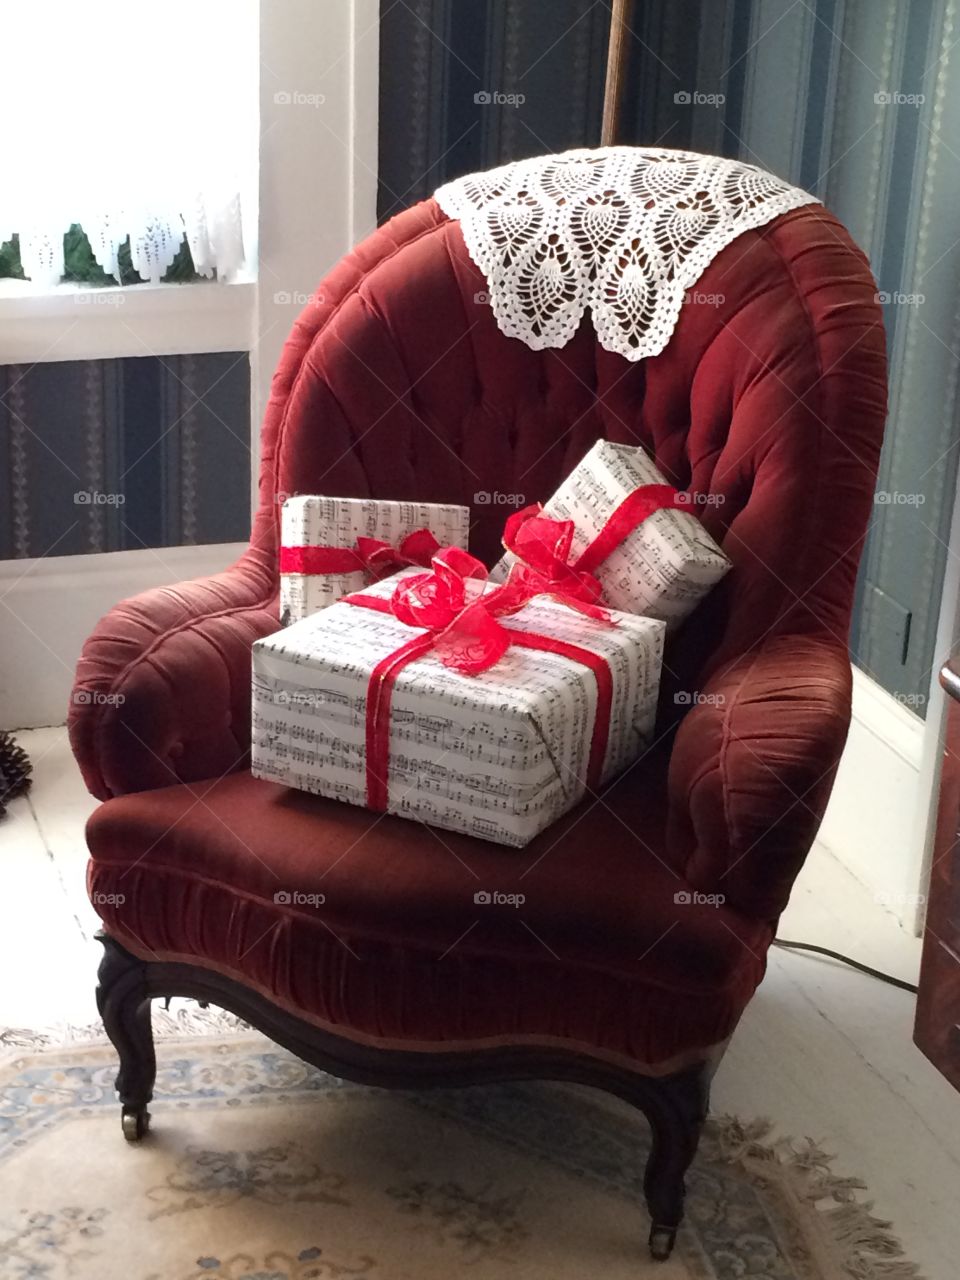 Presents on a Victorian chair.